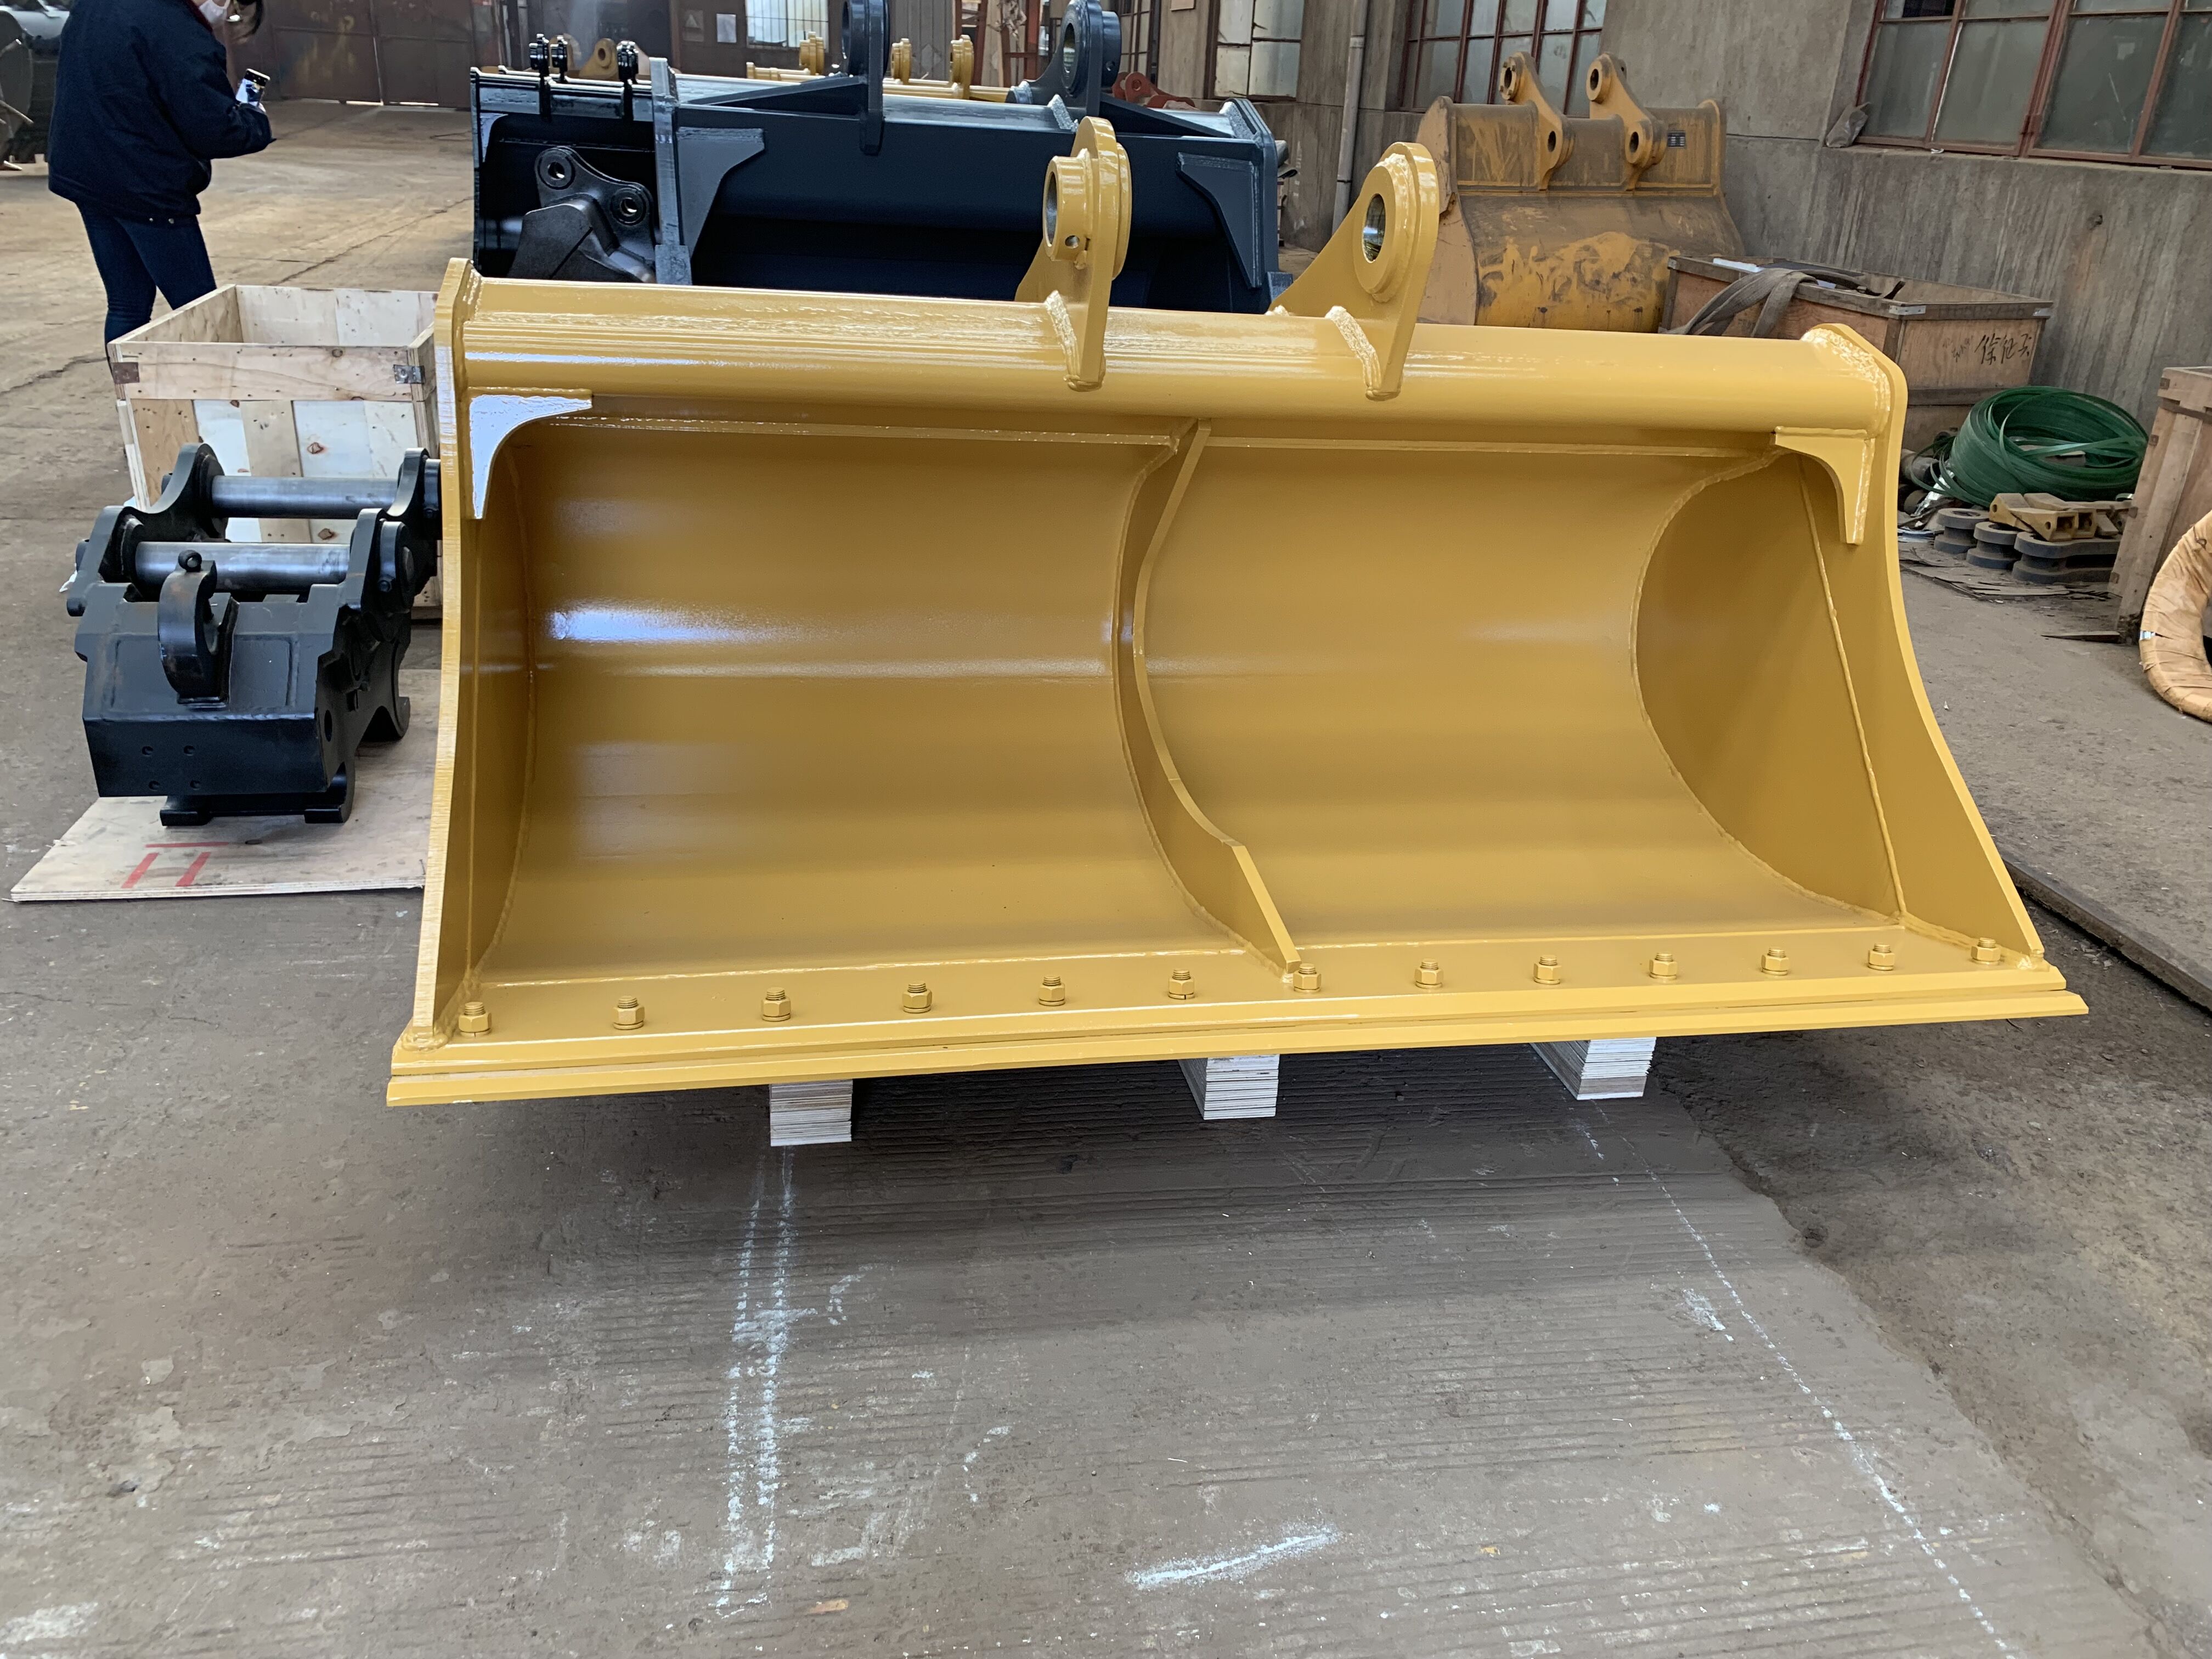 Best quality Jcb Tandem Roller - BONOVO durable ditching clean bucket for trenching and loading - Bonovo - Bonovo